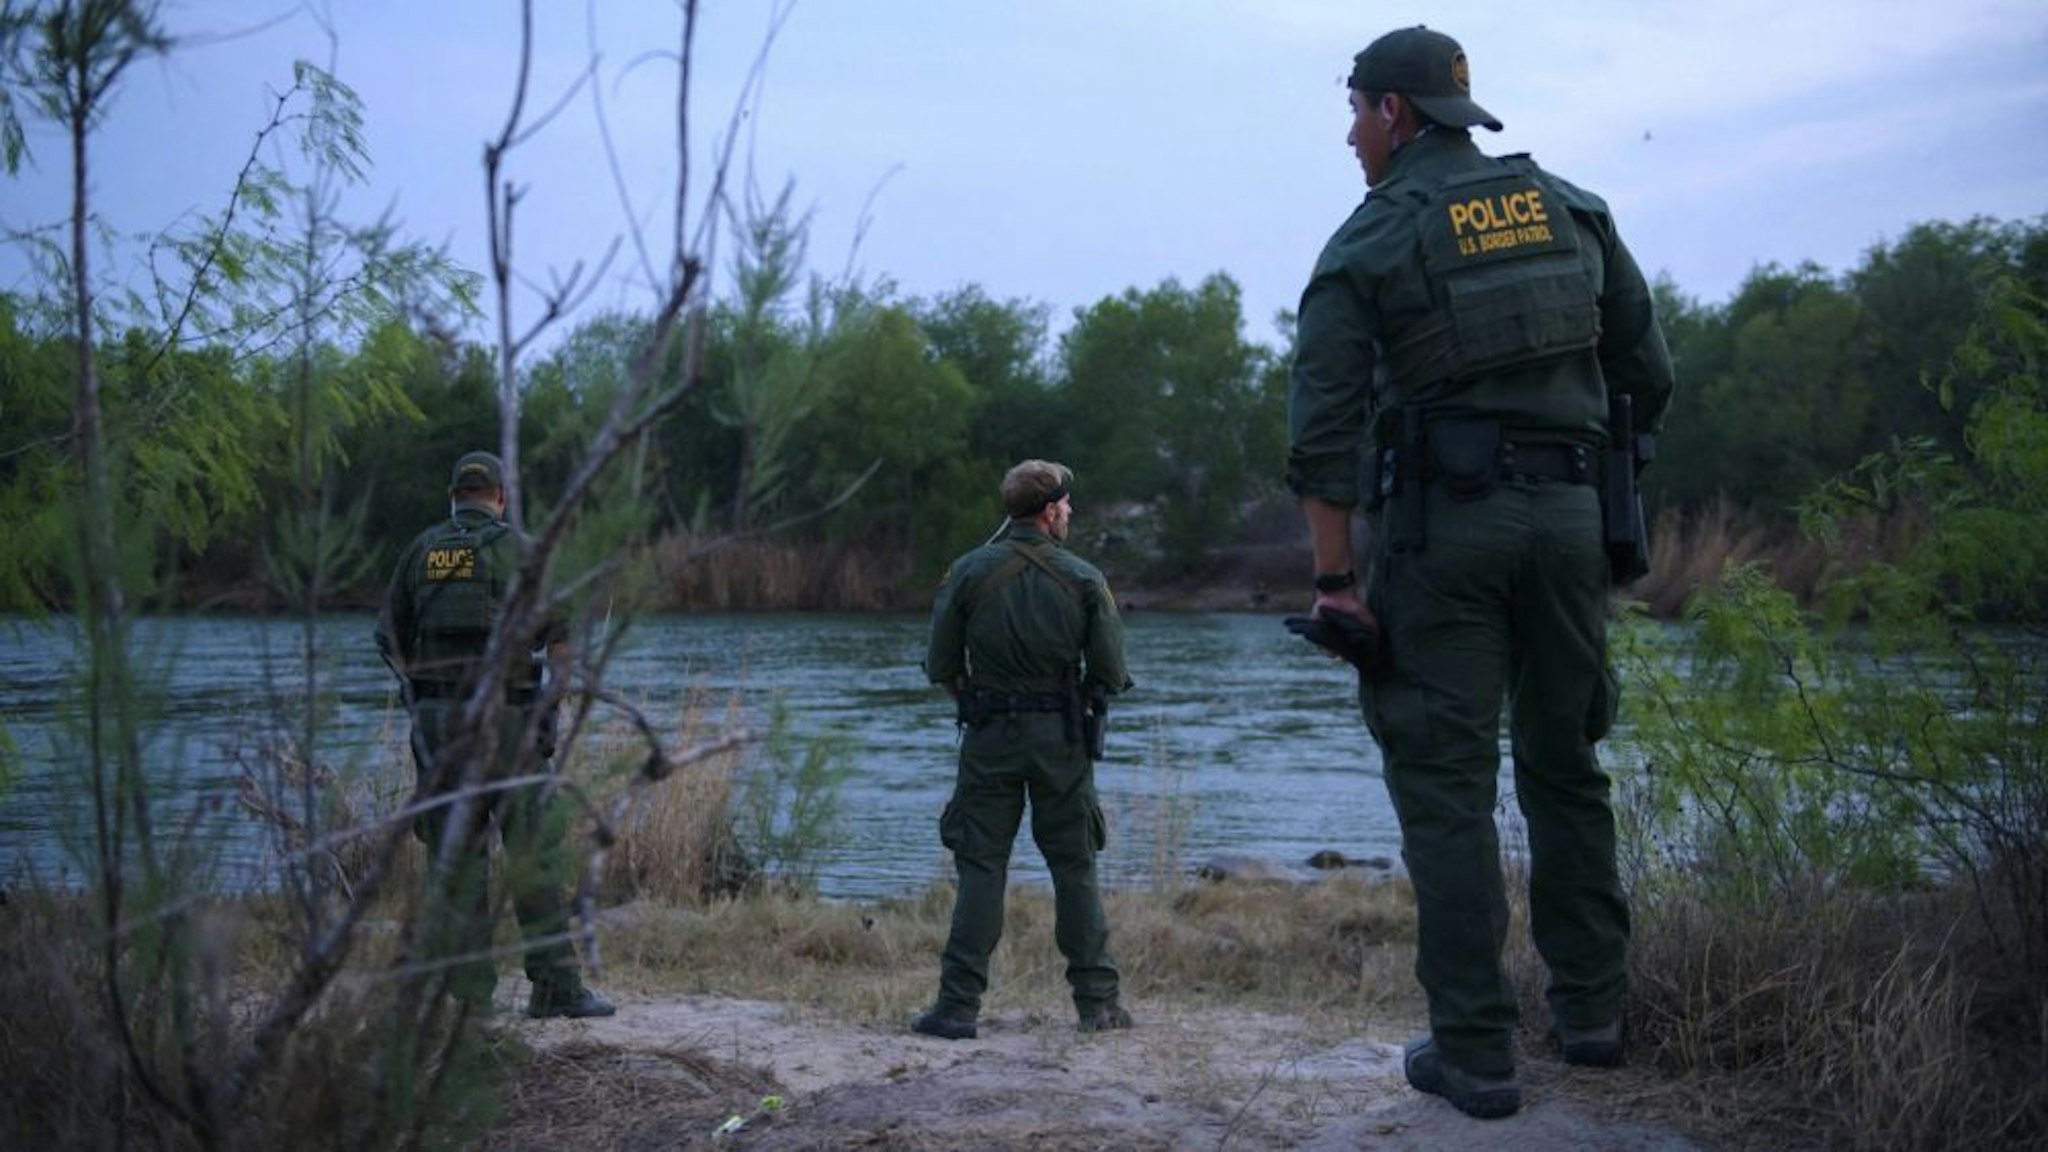 US border patrol agents stand on March 27, 2021 before the Rio Grande river that separates the US and Mexico, in the US border city of Roma.